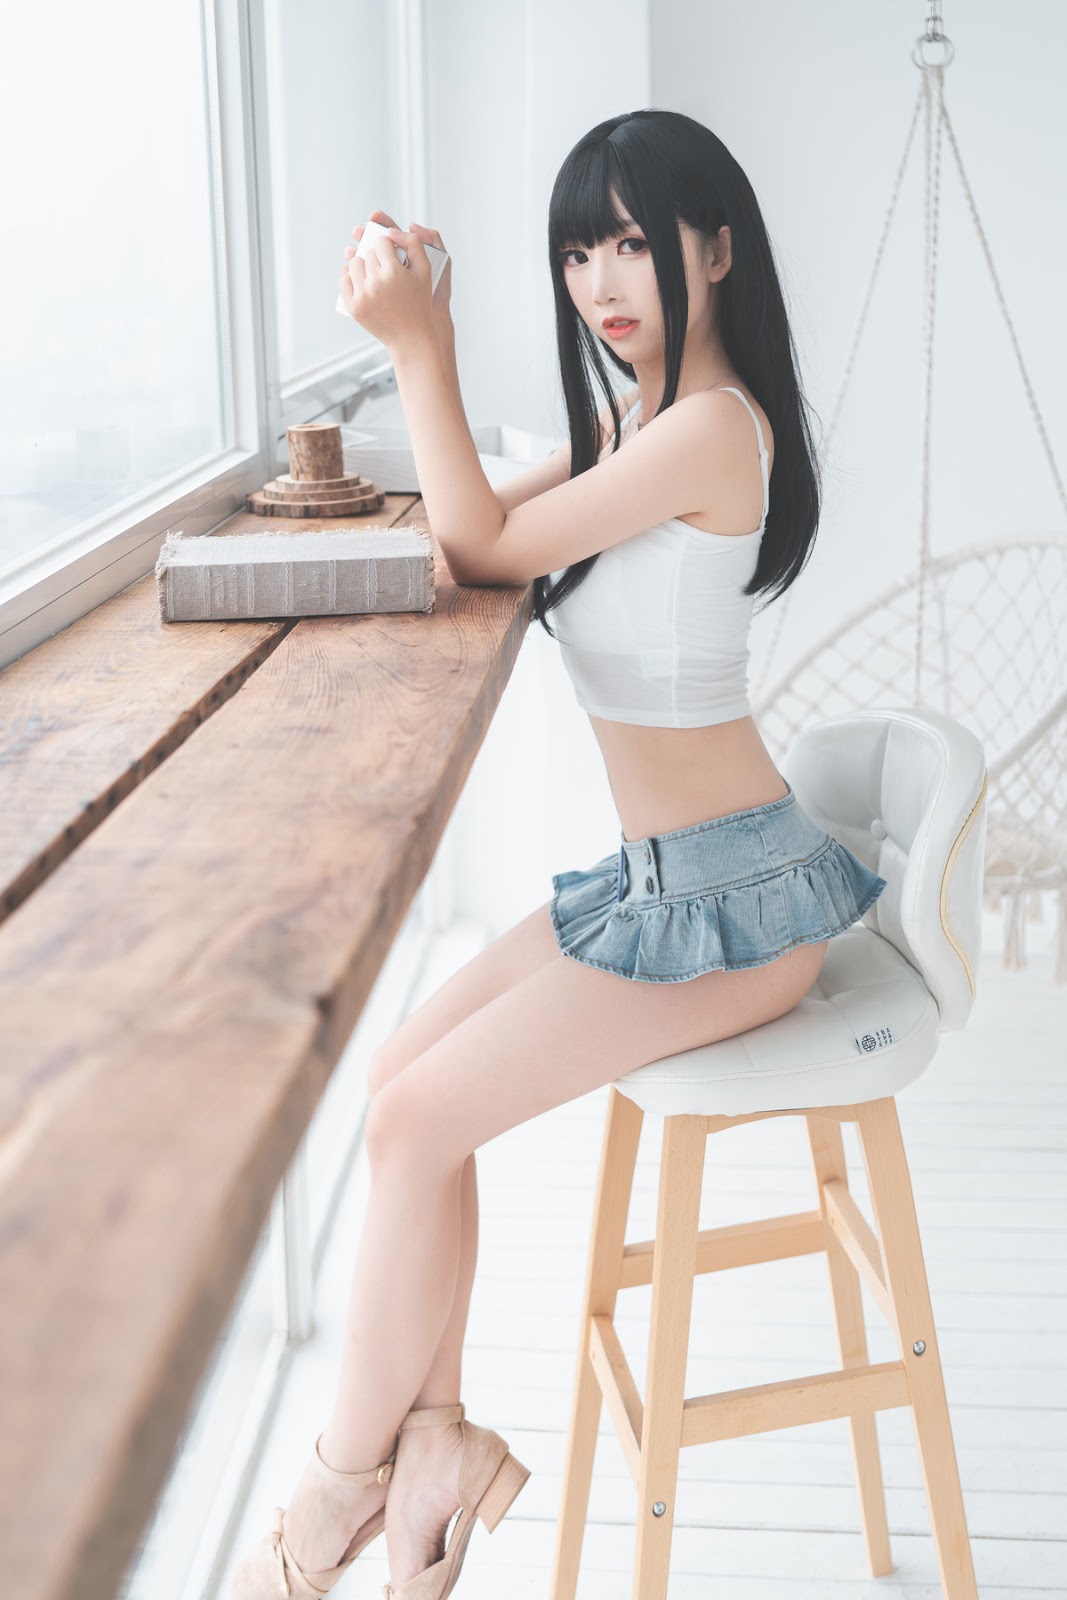 Cosplay 面饼仙儿 可爱女友(4)